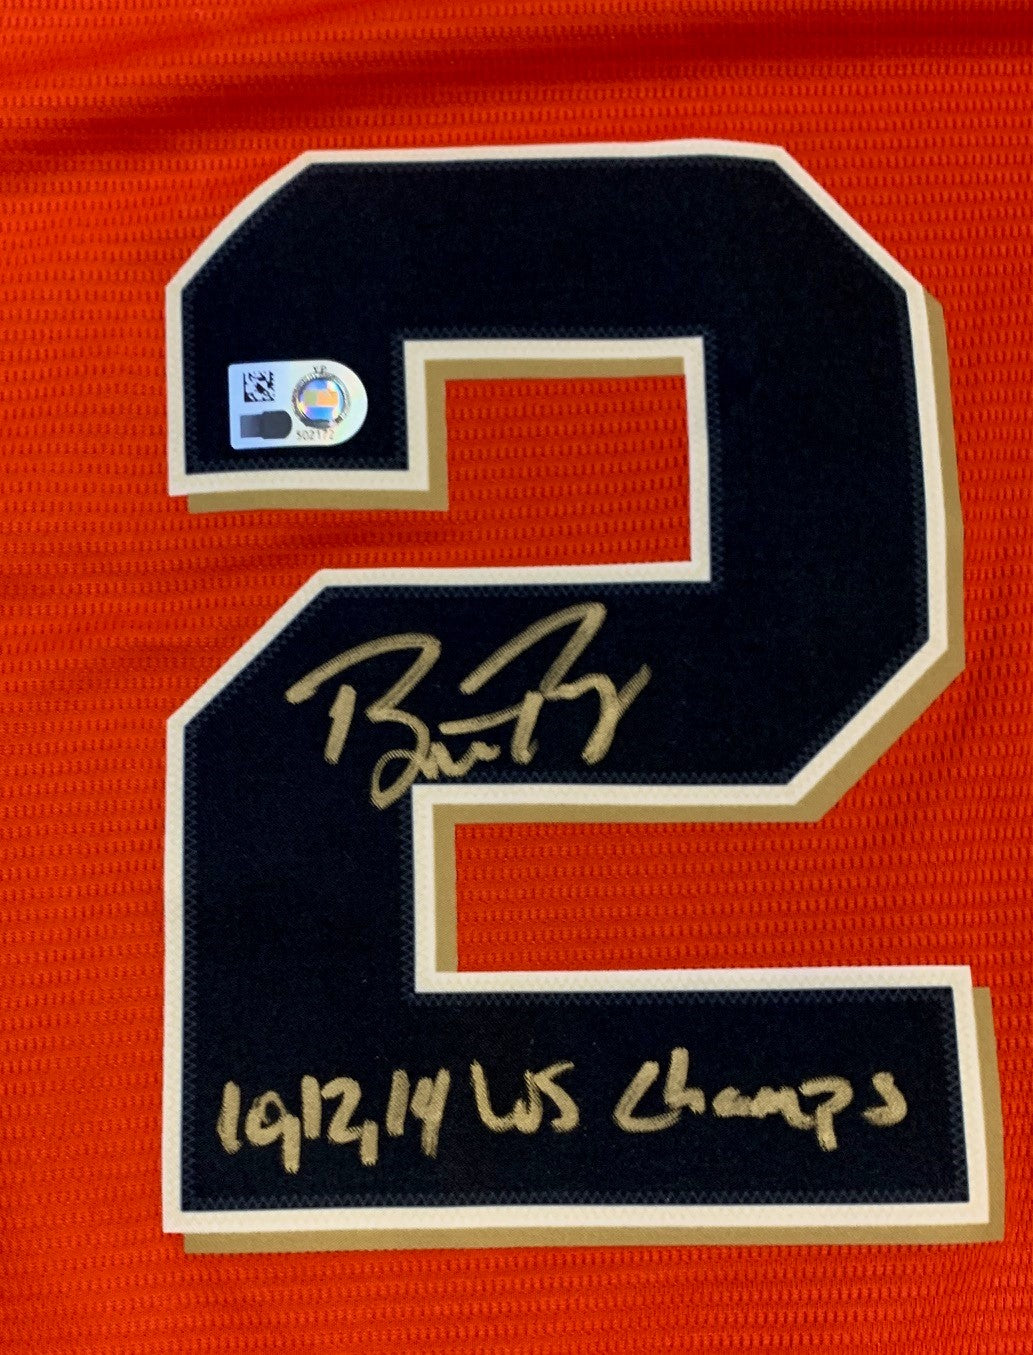 Buster Posey Autographed San Francisco Giants Signed Orange Nike Jersey 3 x World Series Champion MLB Authenticated COA-Powers Sports Memorabilia